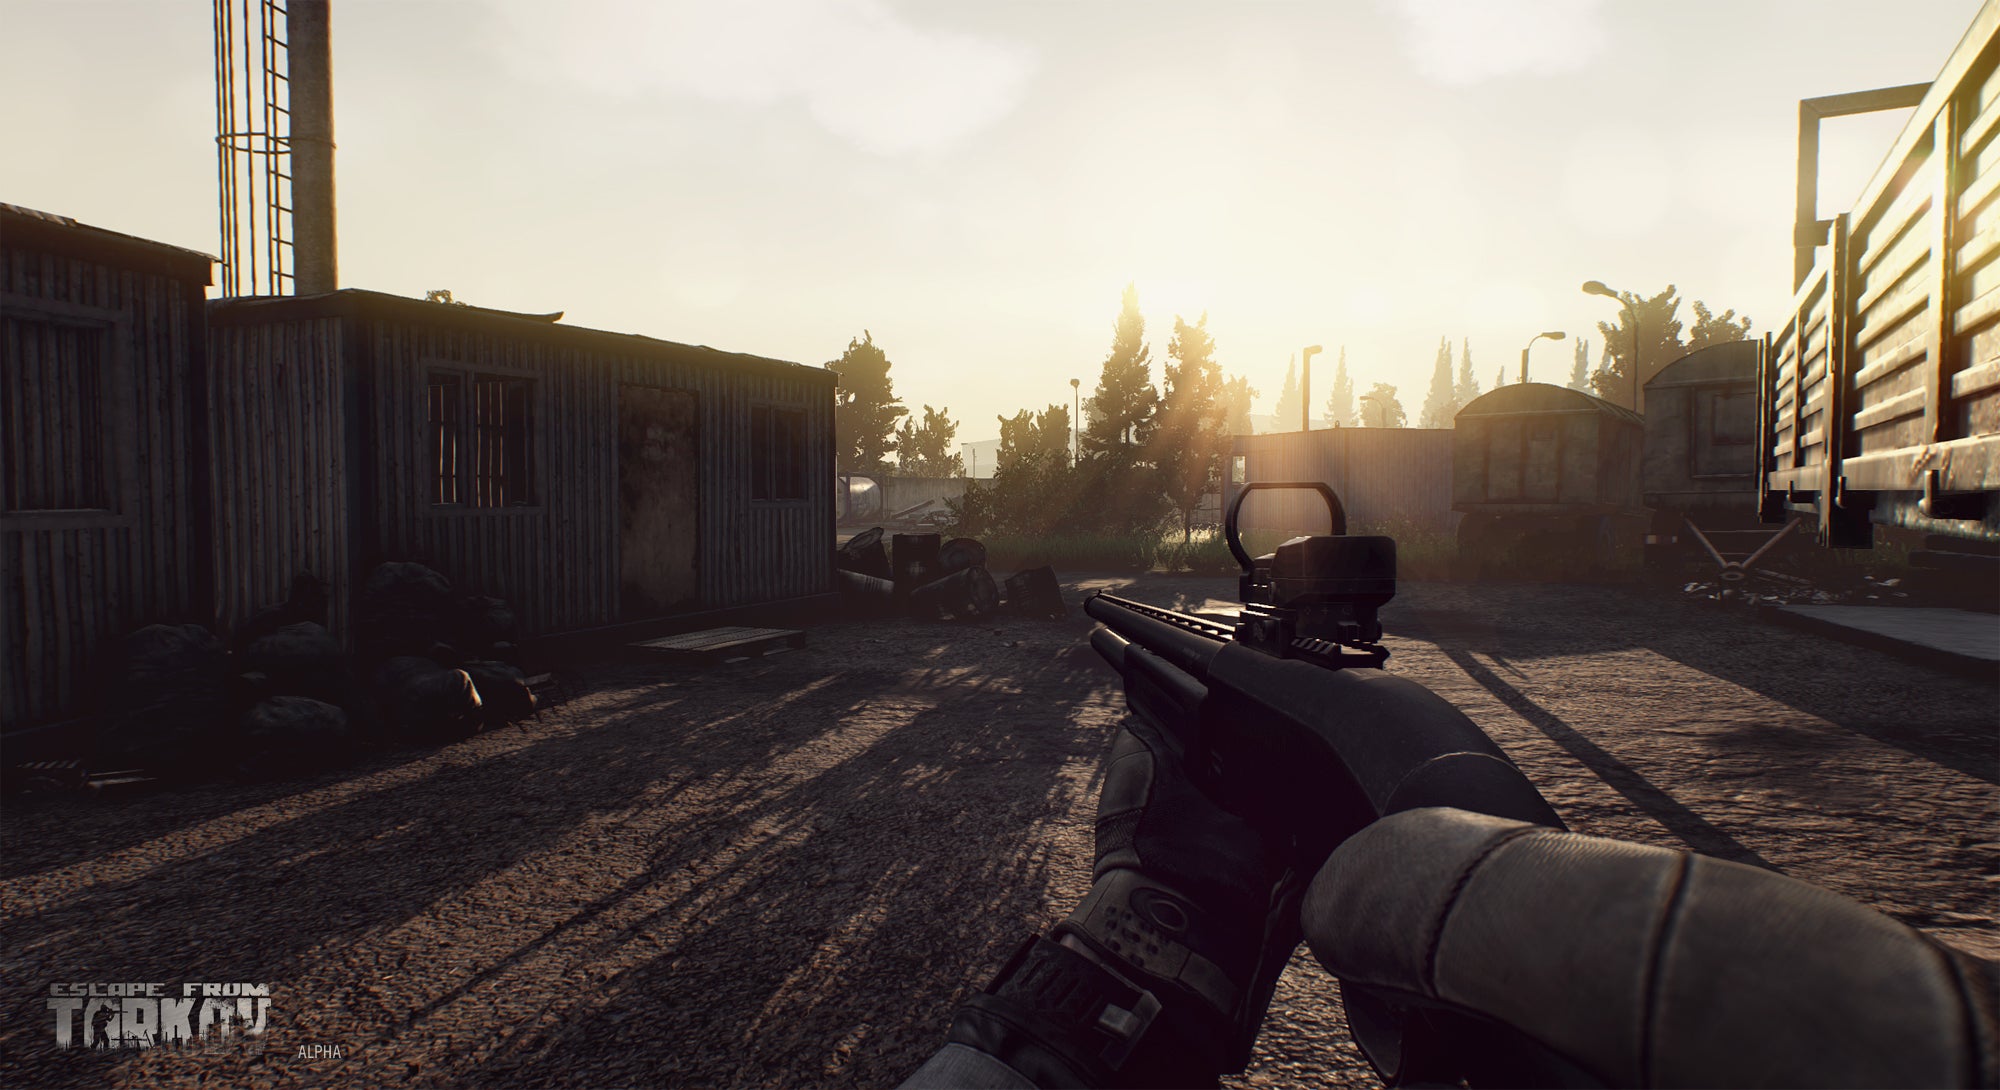 Image for Have a look at Escape from Tarkov's UI in these new screens